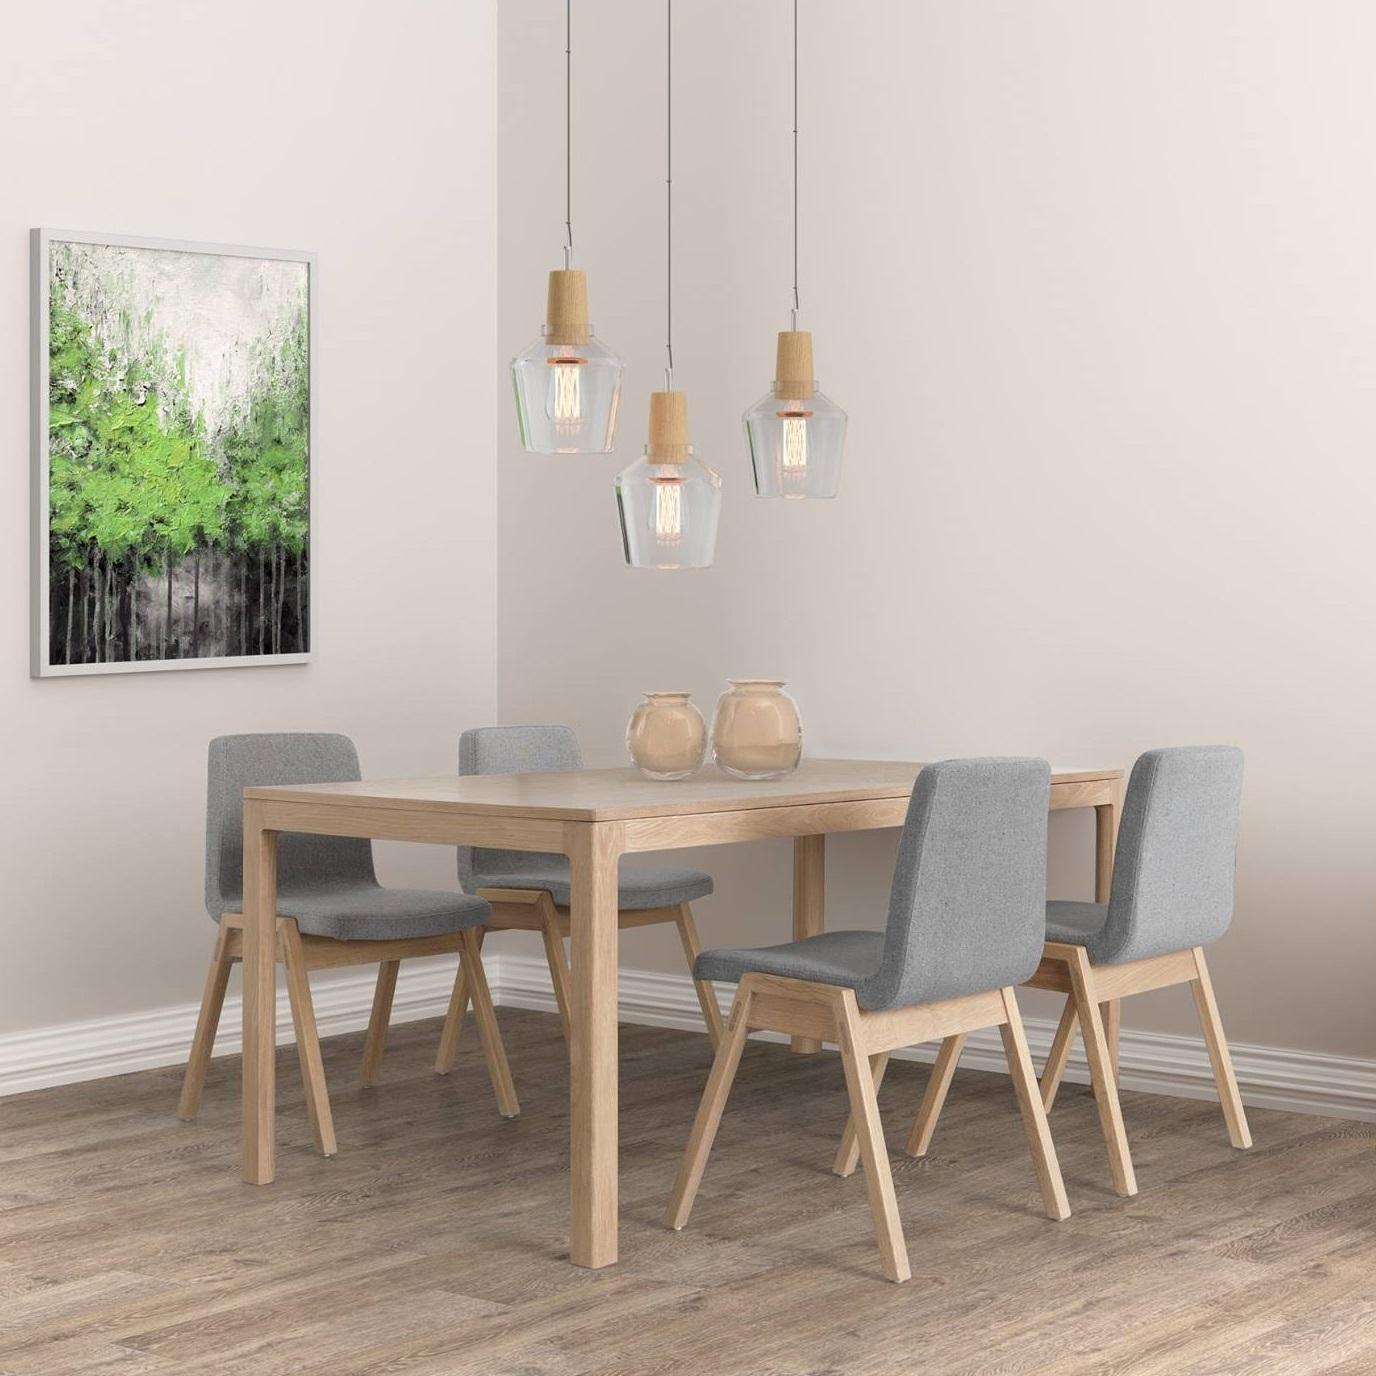 Contemporary Iconic Shape Dining Table Offered in Wood  For Sale